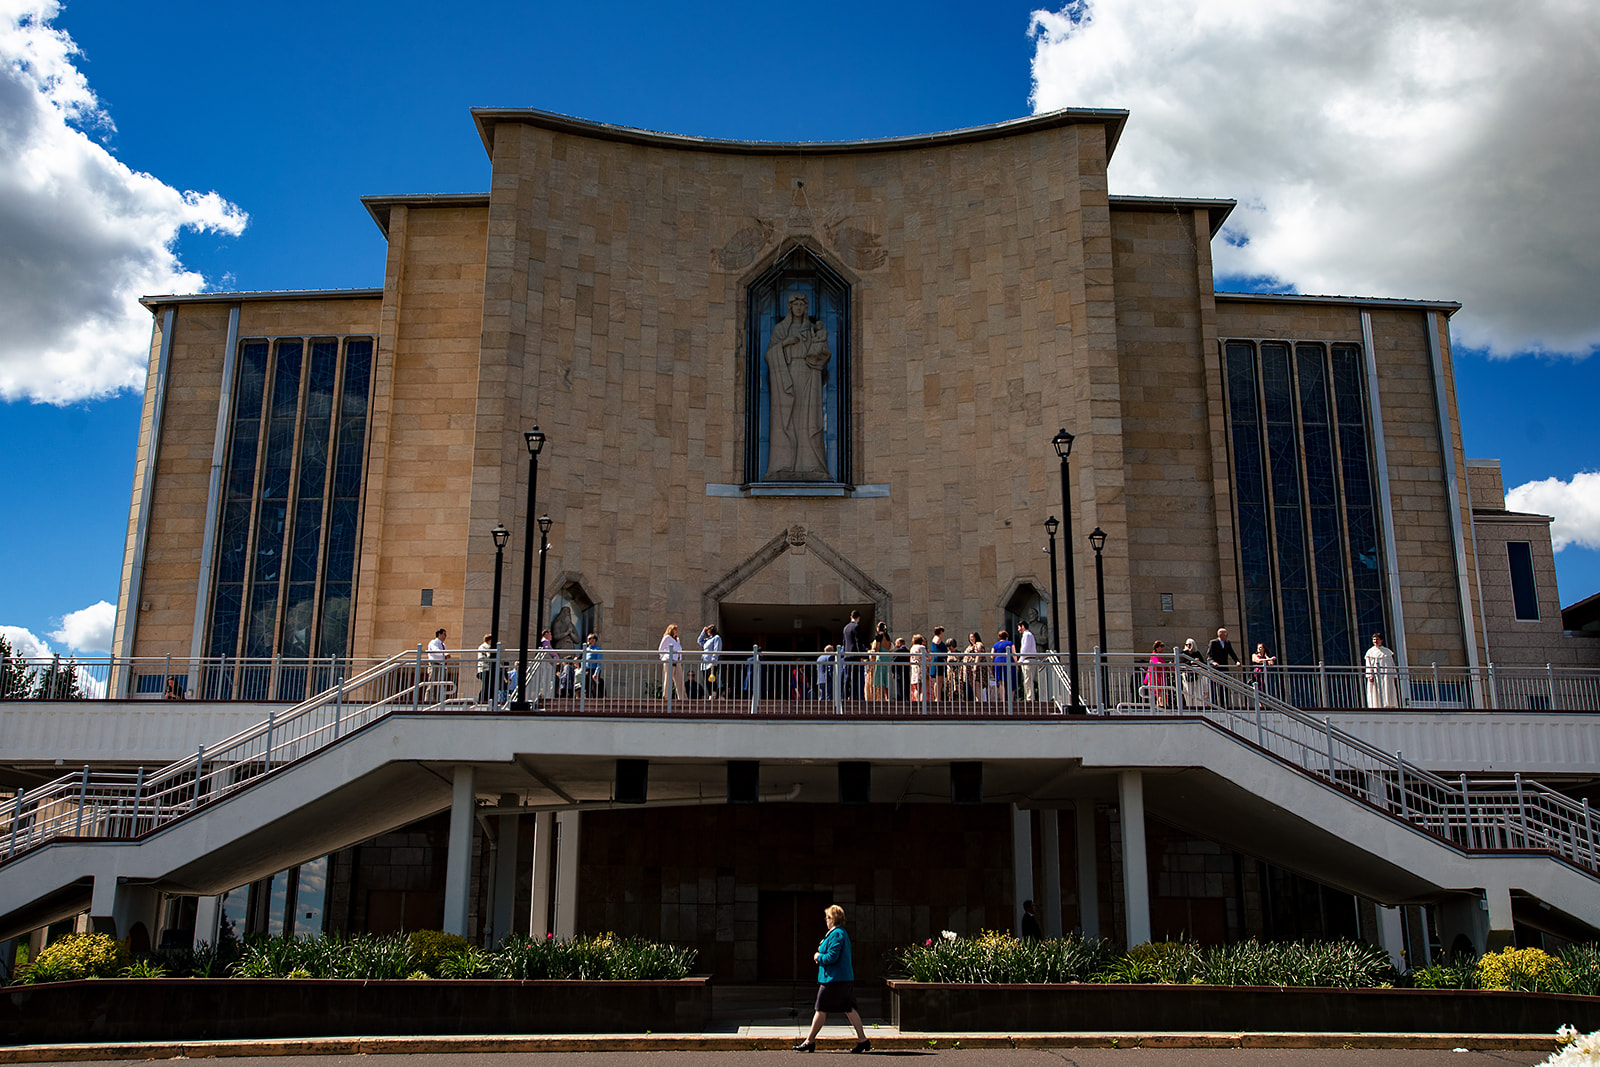 people entering the national shrine of our lady of czestochowa church